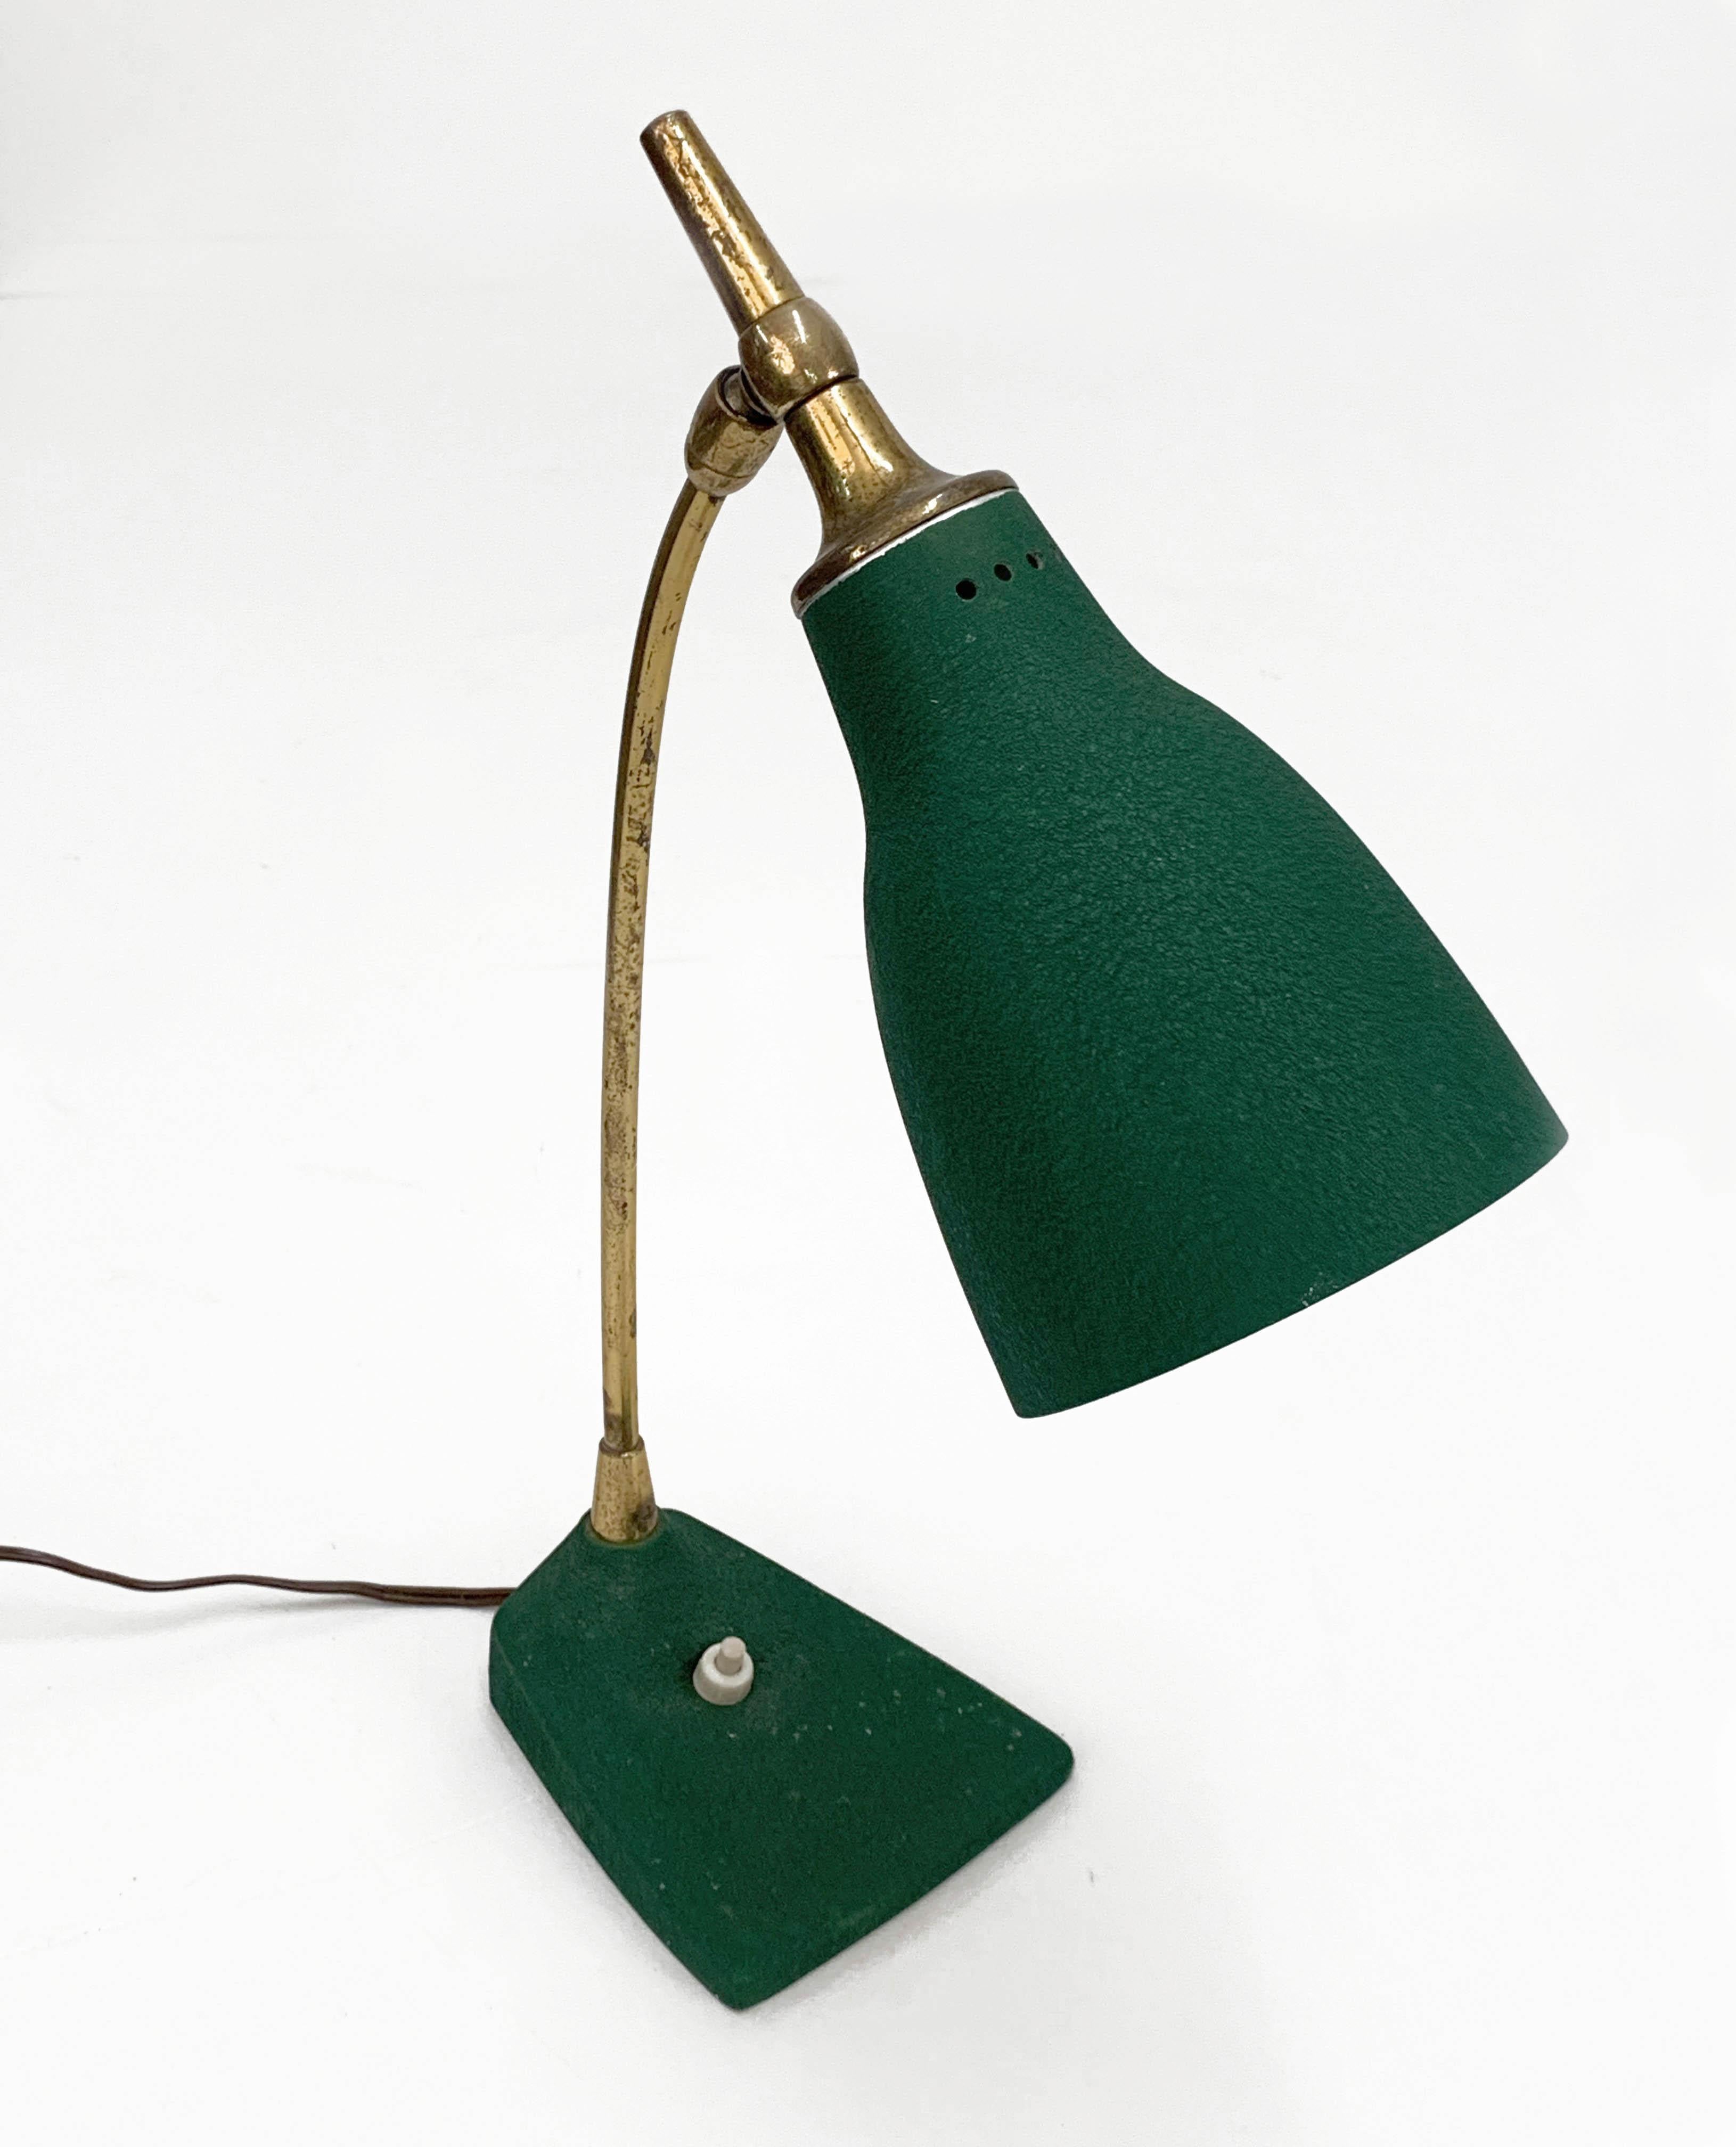 Amazing midcentury adjustable green brass with aluminium shade and cast iron base. This marvelous table lamp was designed by Gebrüder Cosack during the 1950s.

This table lamp is a perfect mix of materials, the green cast iron base, the sinuous